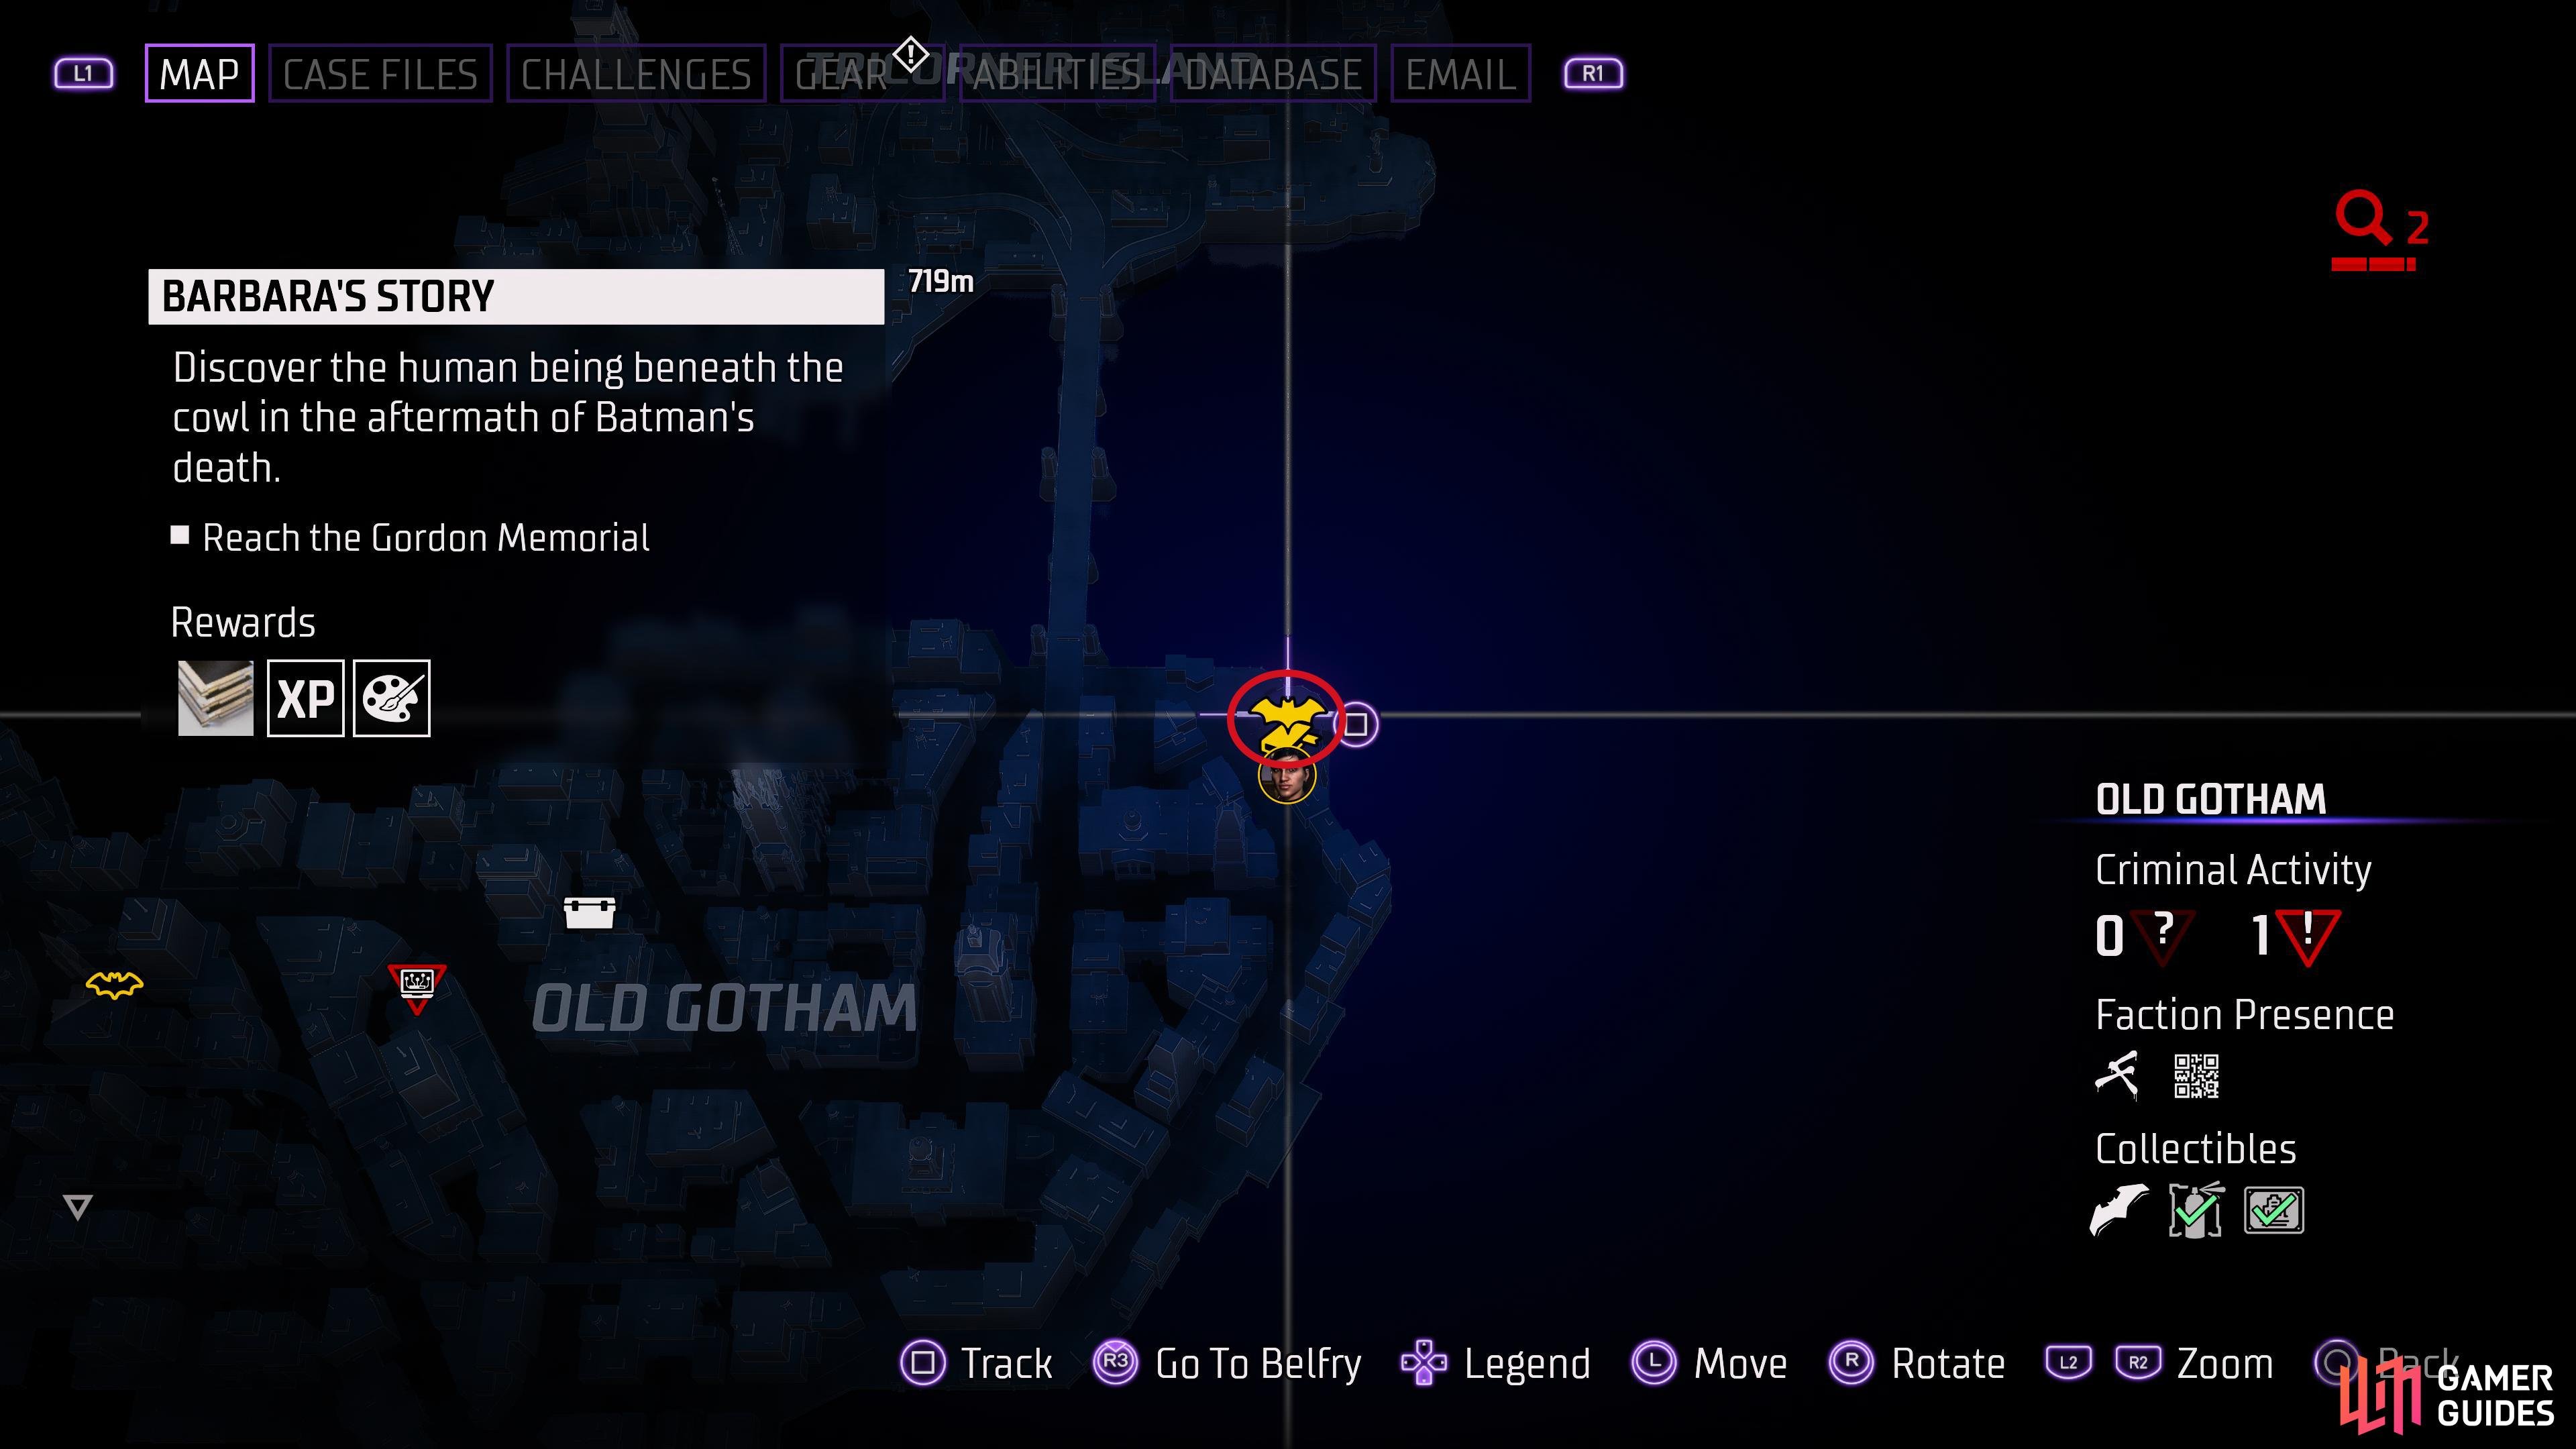 Side Stories are indicated by this icon on the map. The color of the icon will change depending on which hero you are. Blue for Nightwing, Yellow for Batgirl, Green for Robin, and Red for Red Hood.